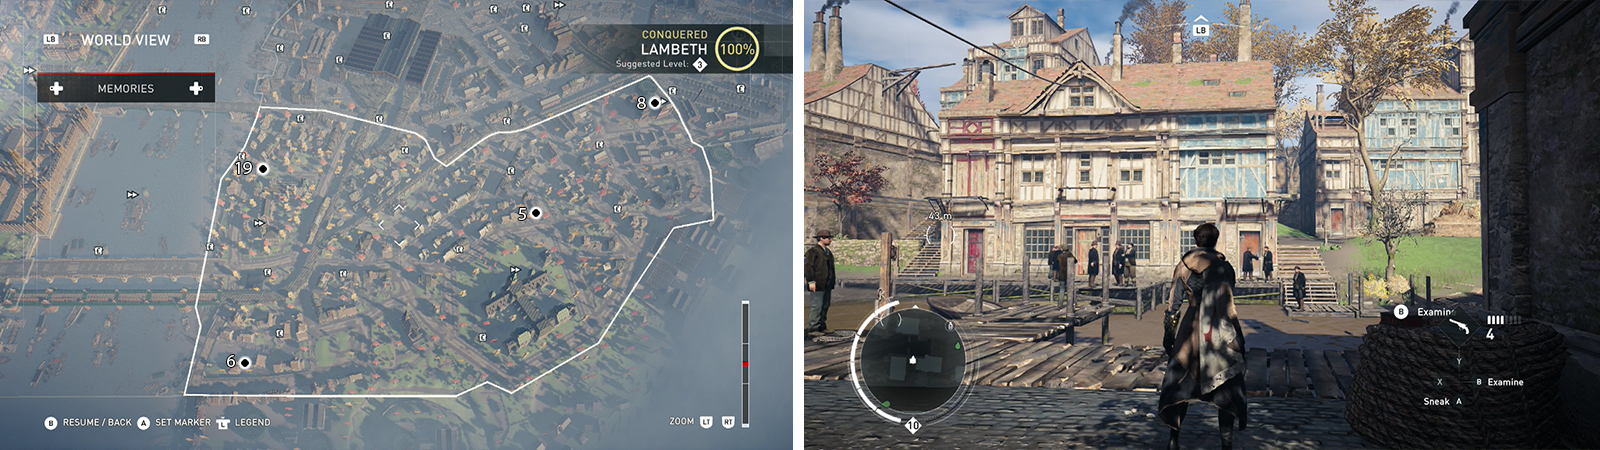 The Secrets of London can be found on the map (left). Location of Secret of London #06 pictured (right).